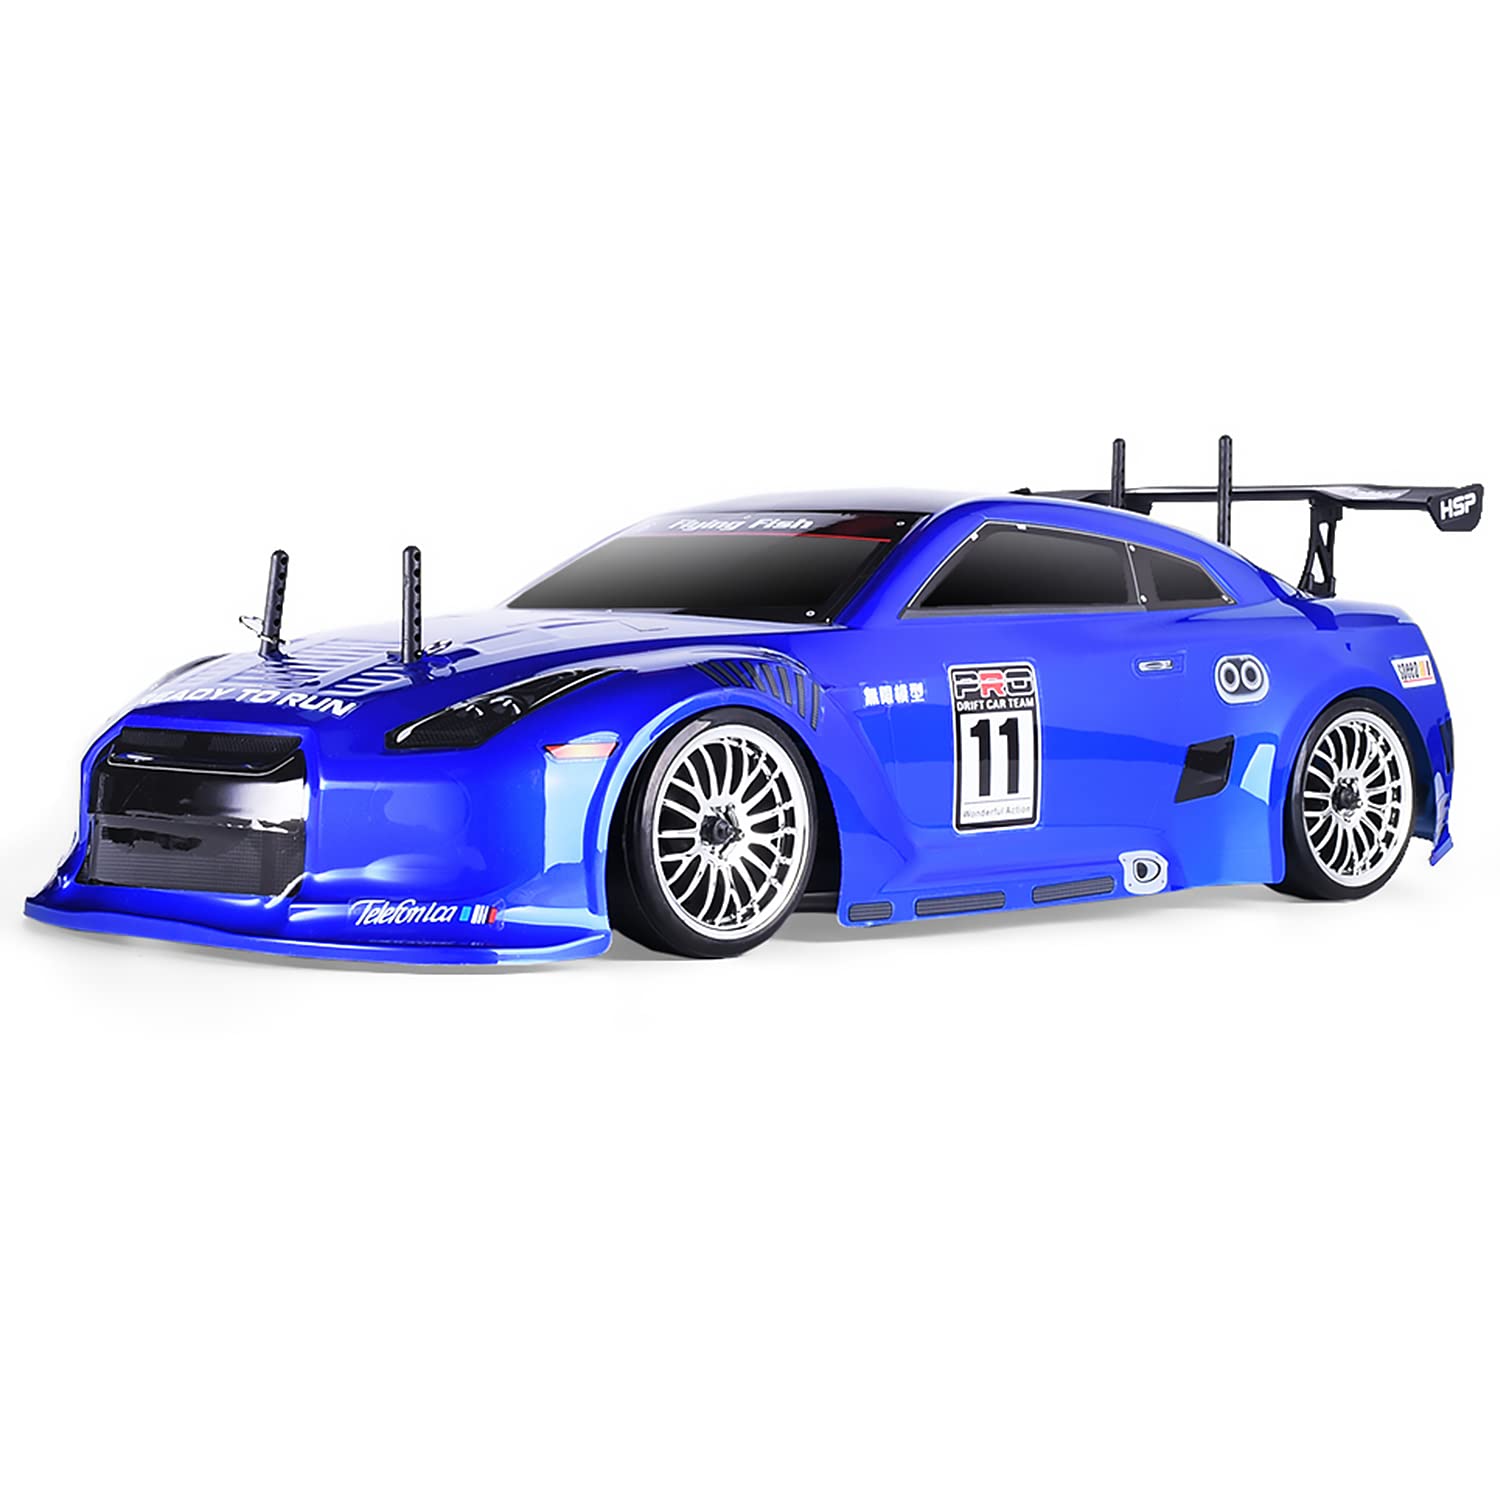 HSP RC Car 1/10 Scale 4wd OffRoad RC Drift Car Electronic Monster Truck 4x4 Vehicle Toys Brushless Motor High Speed 60km/h RTR Hobby Remote Control Car, 2022 Upgraded Car Shell with Extra 4Drift Tires